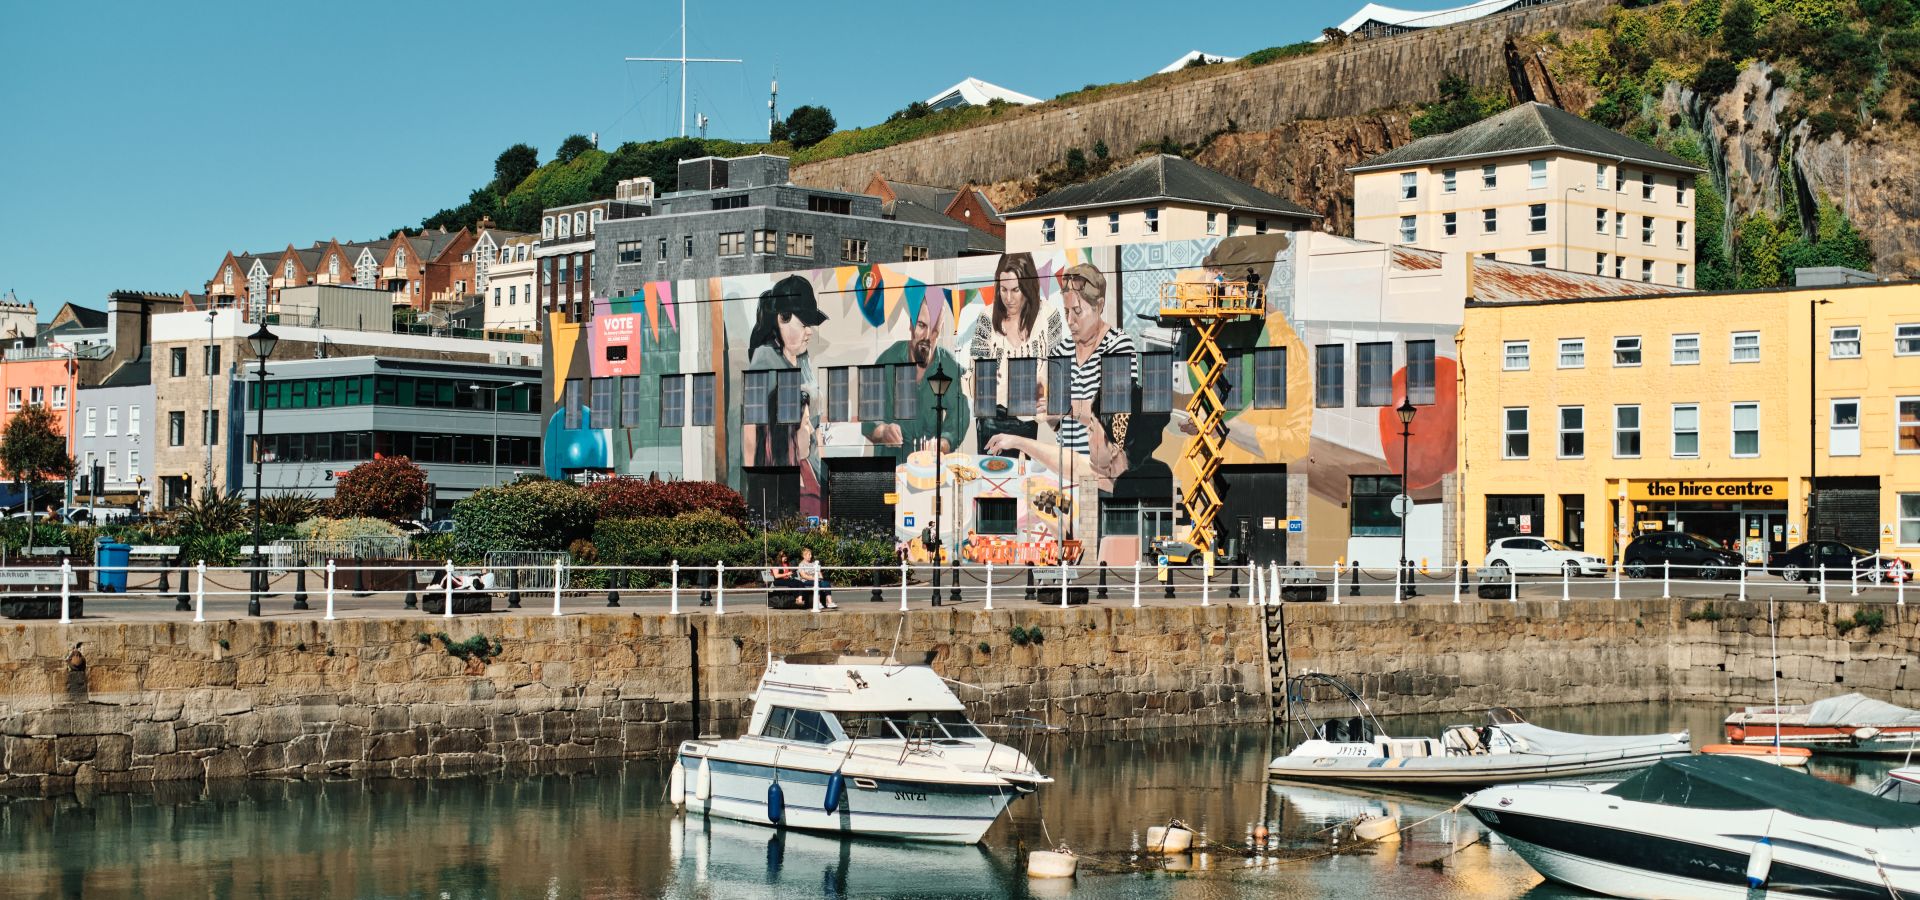 Large scale mural next to a harbour